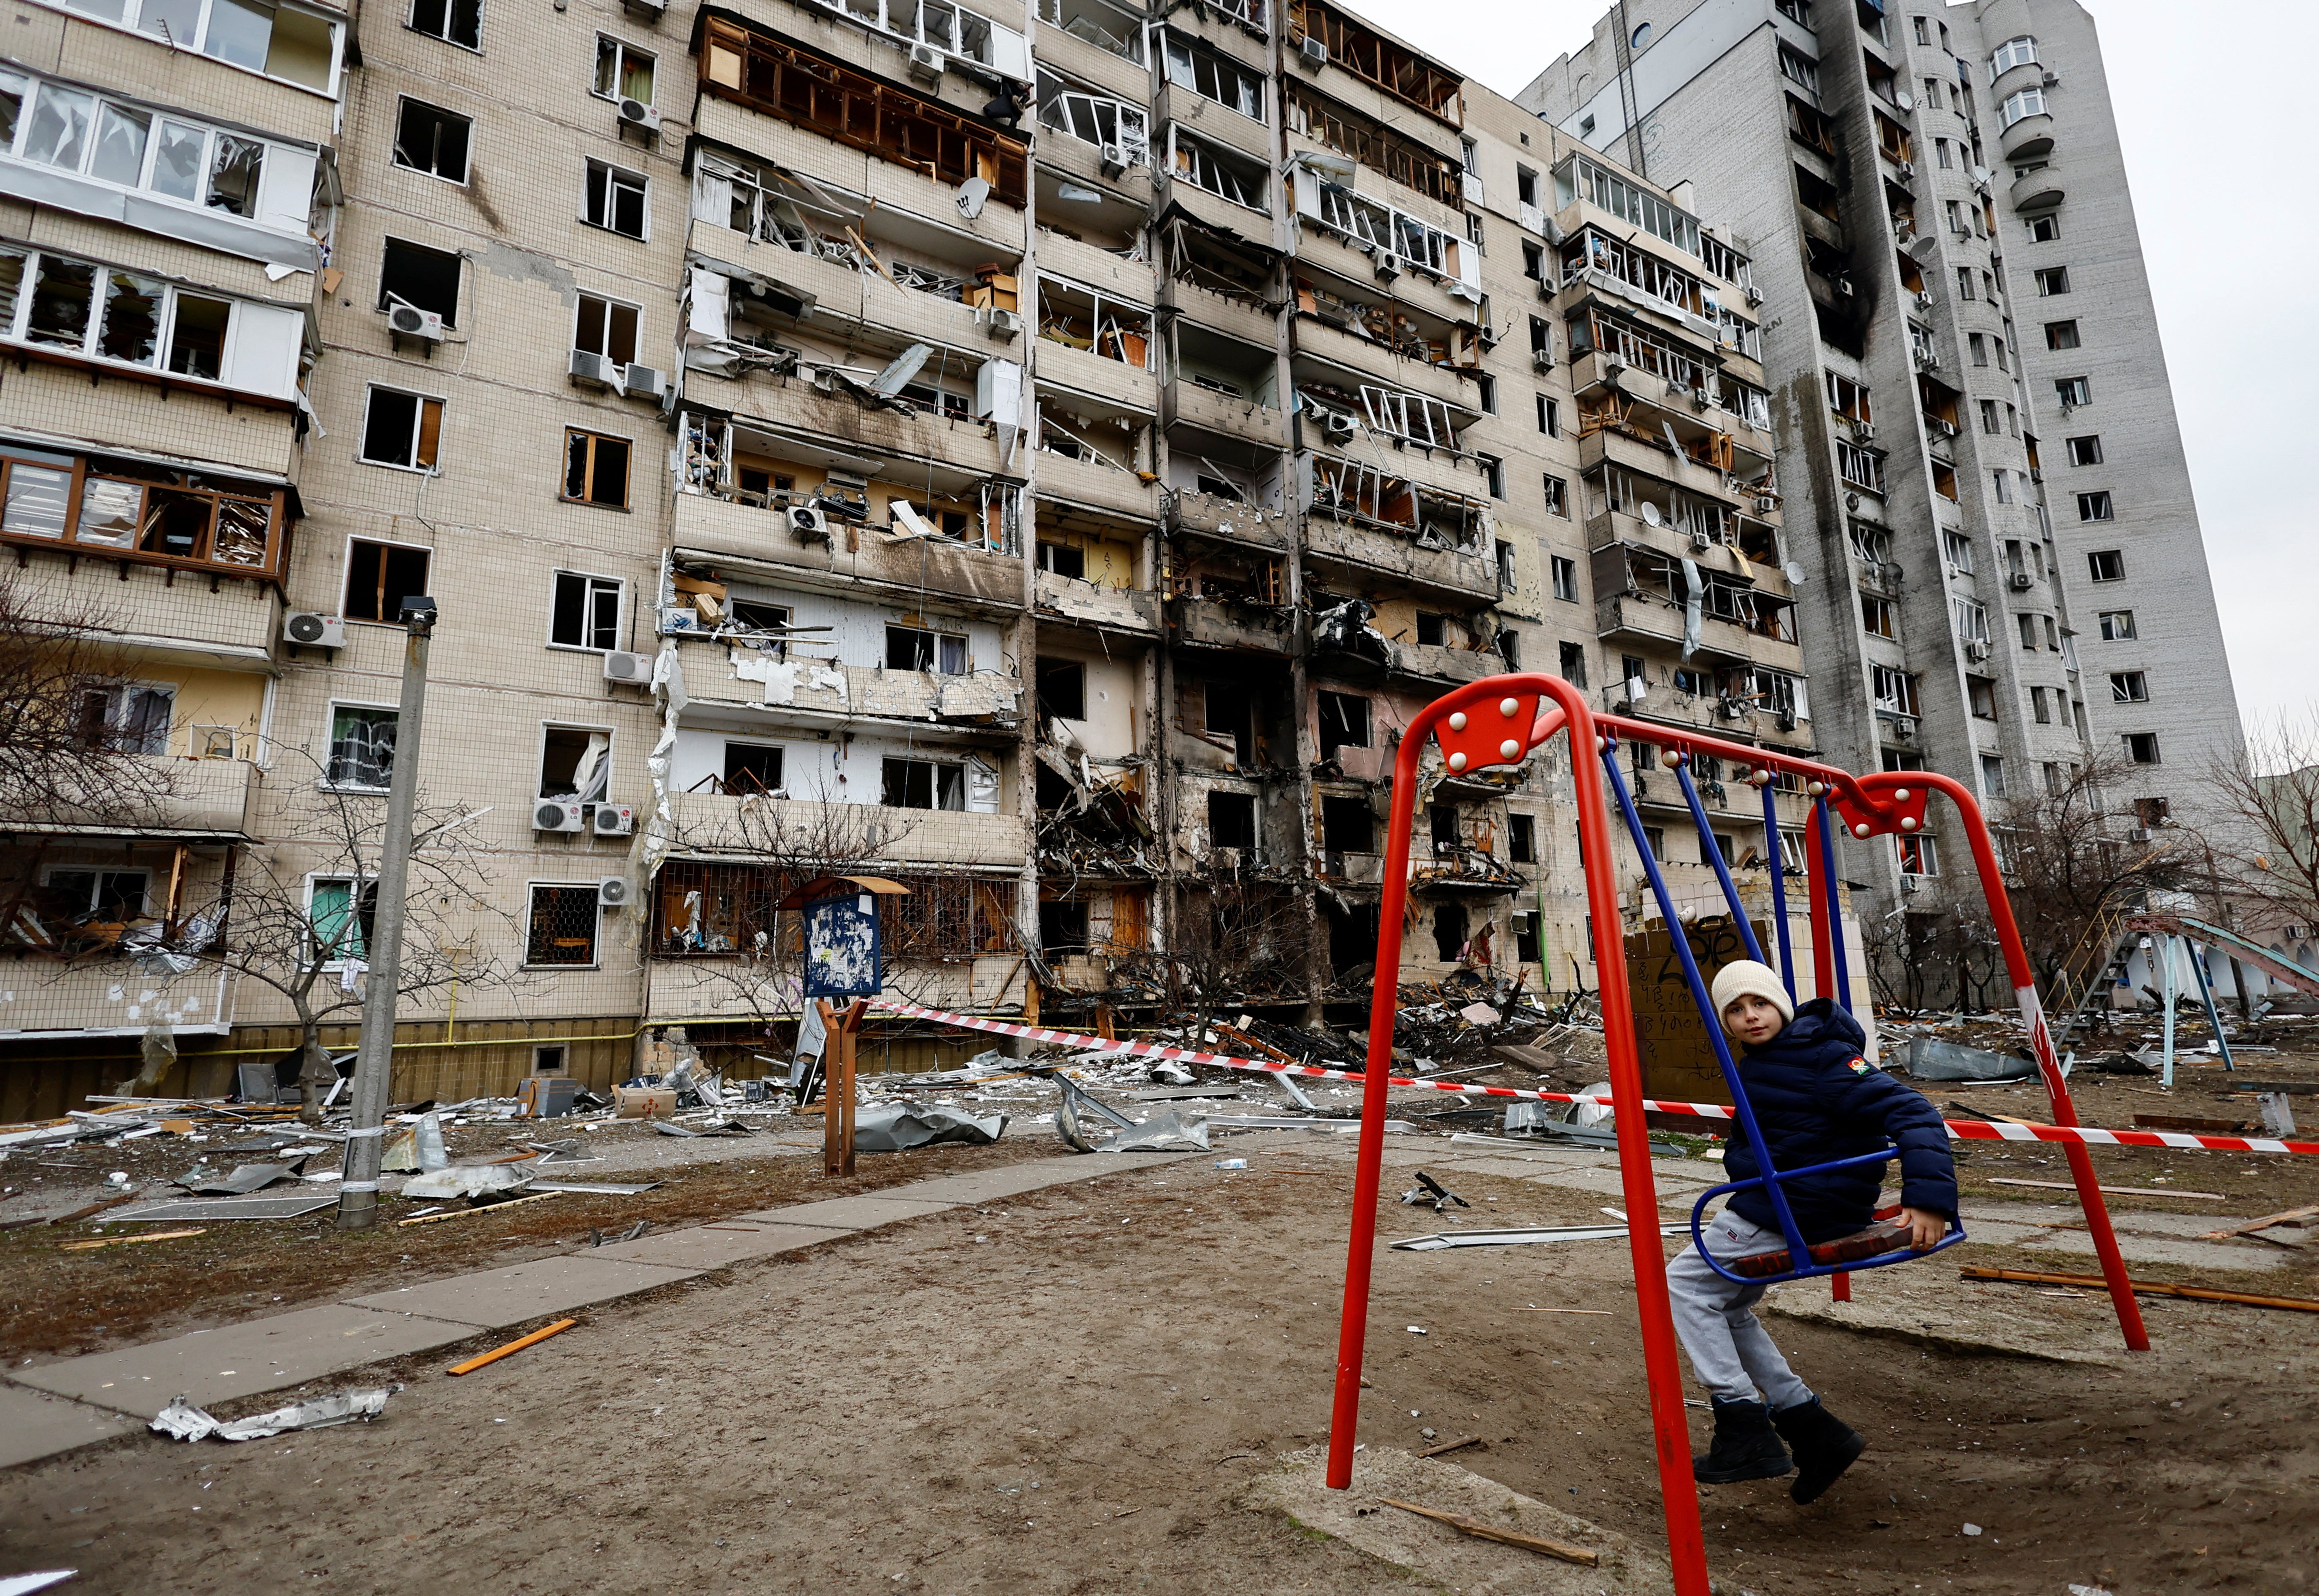 A child sits on a swing in front of a damaged residential building in Kyiv